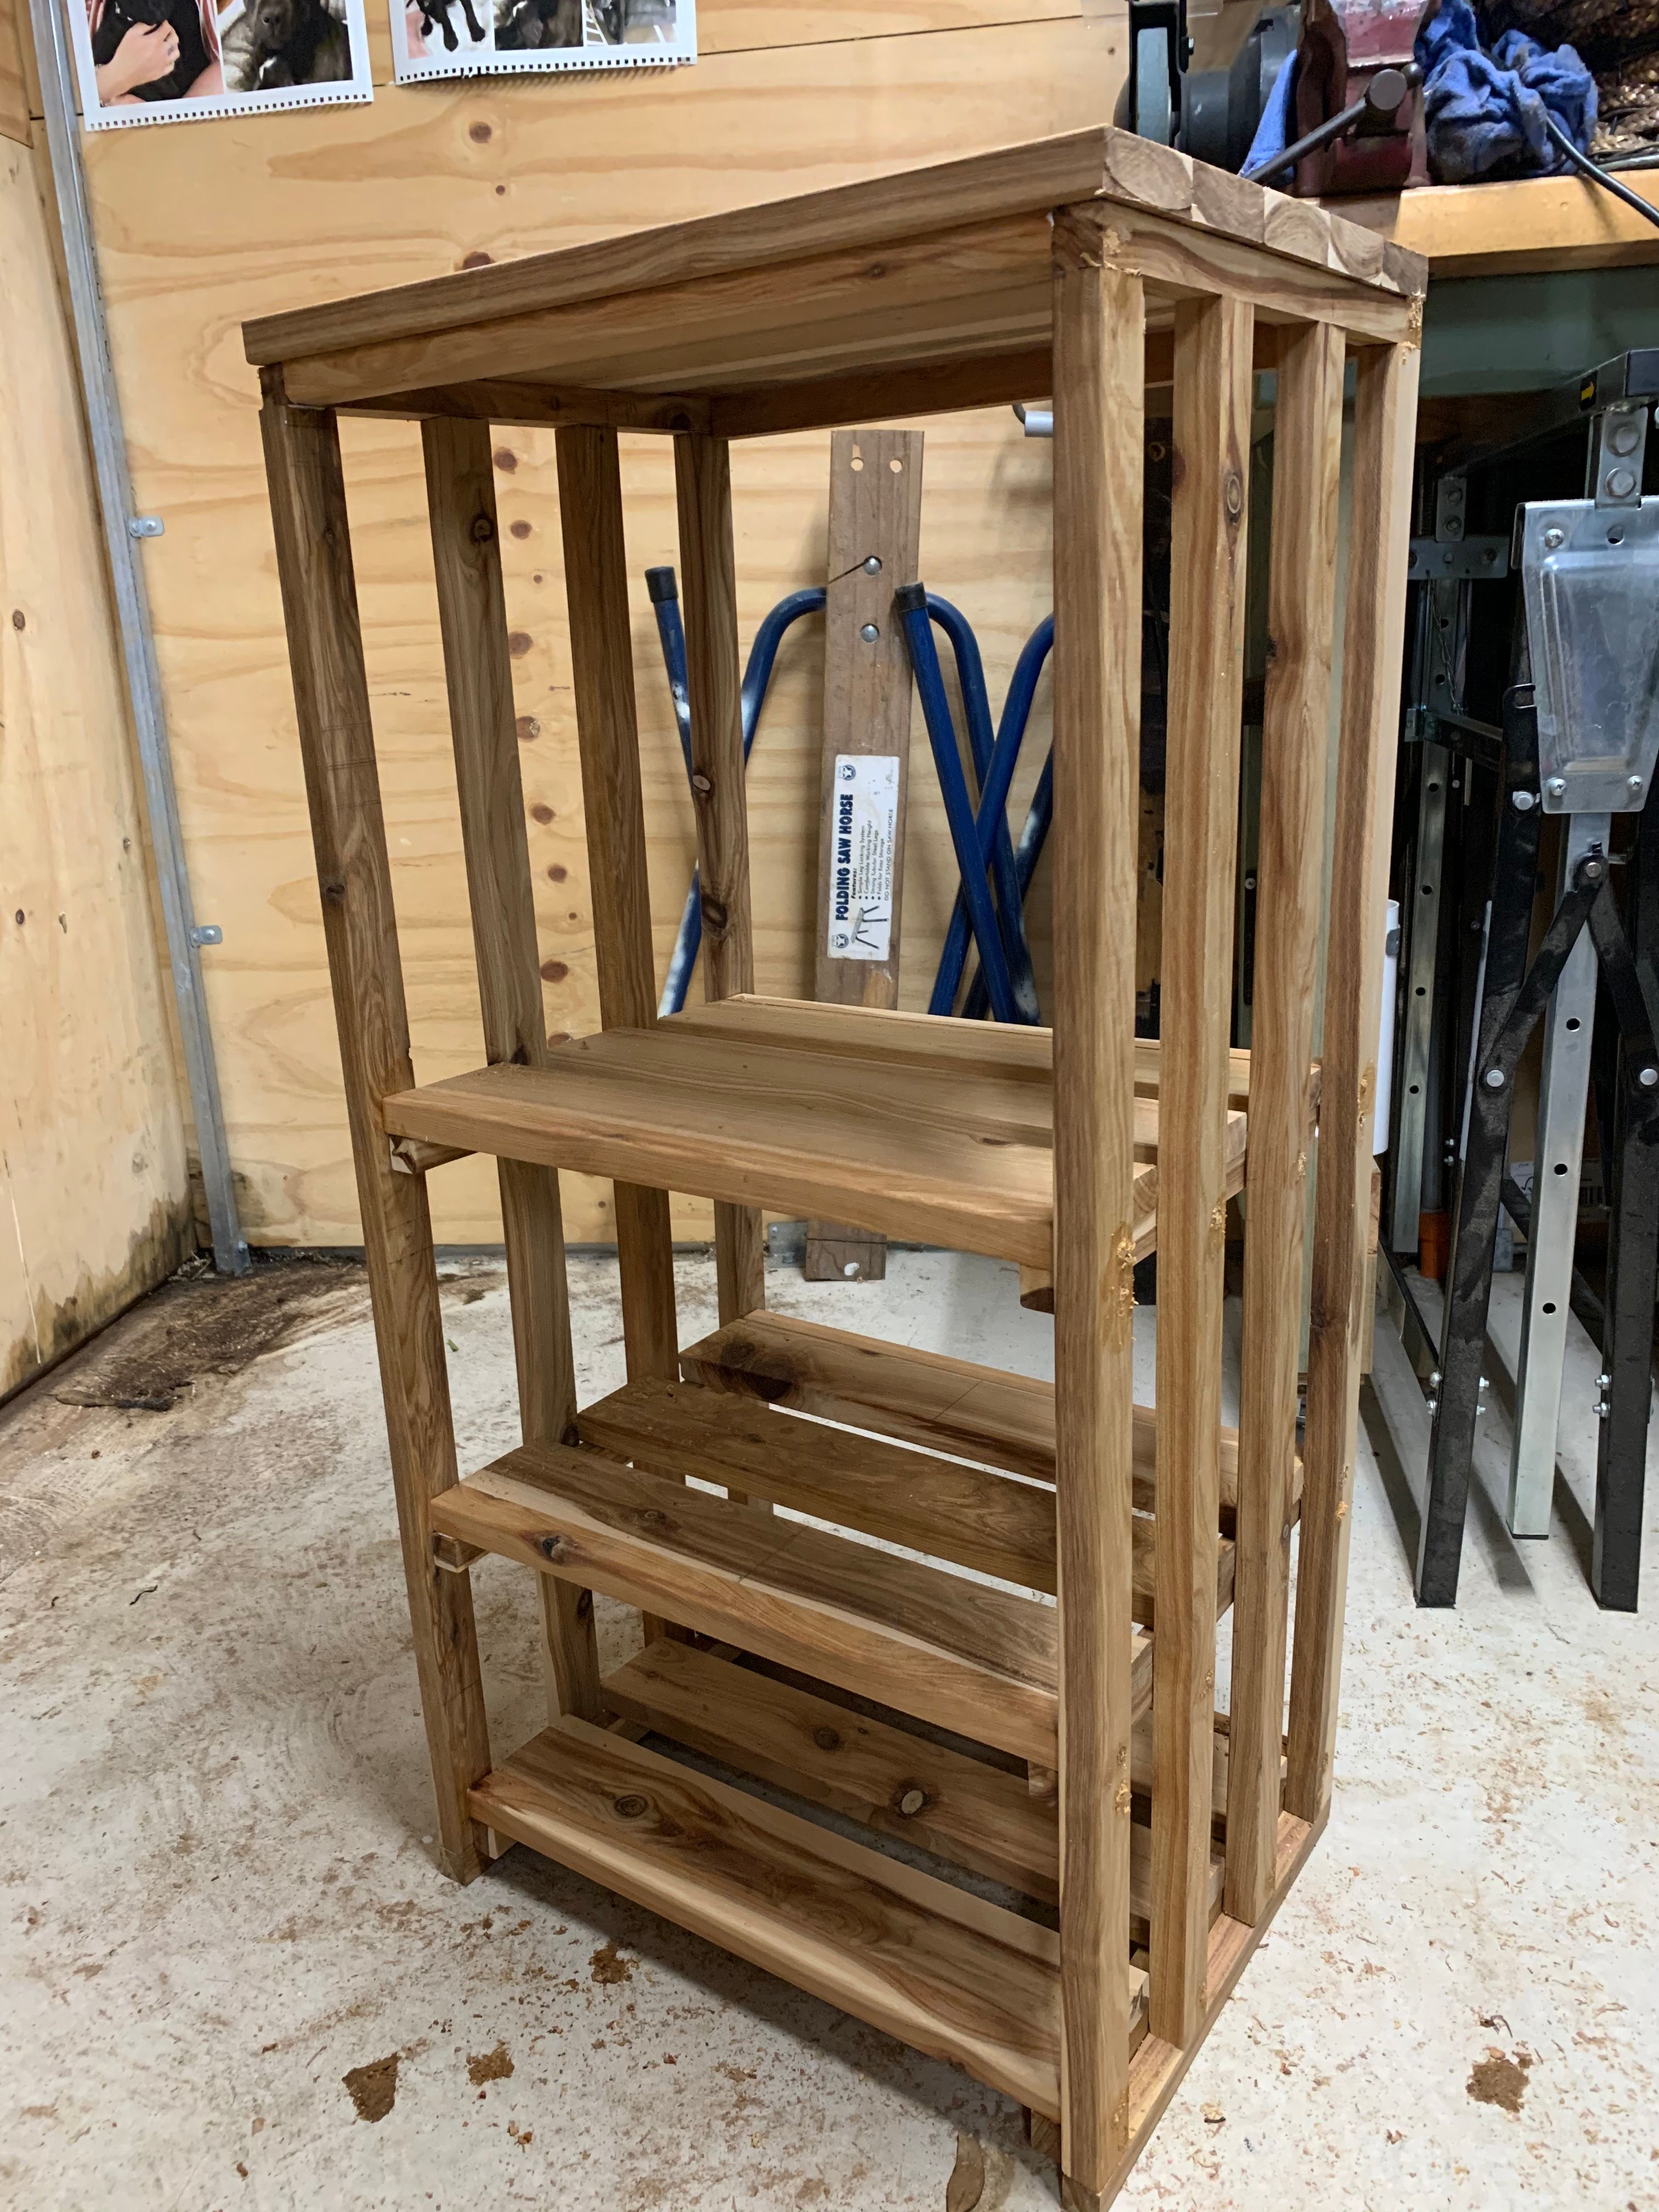 Plant and shoe stand | Bunnings Workshop community